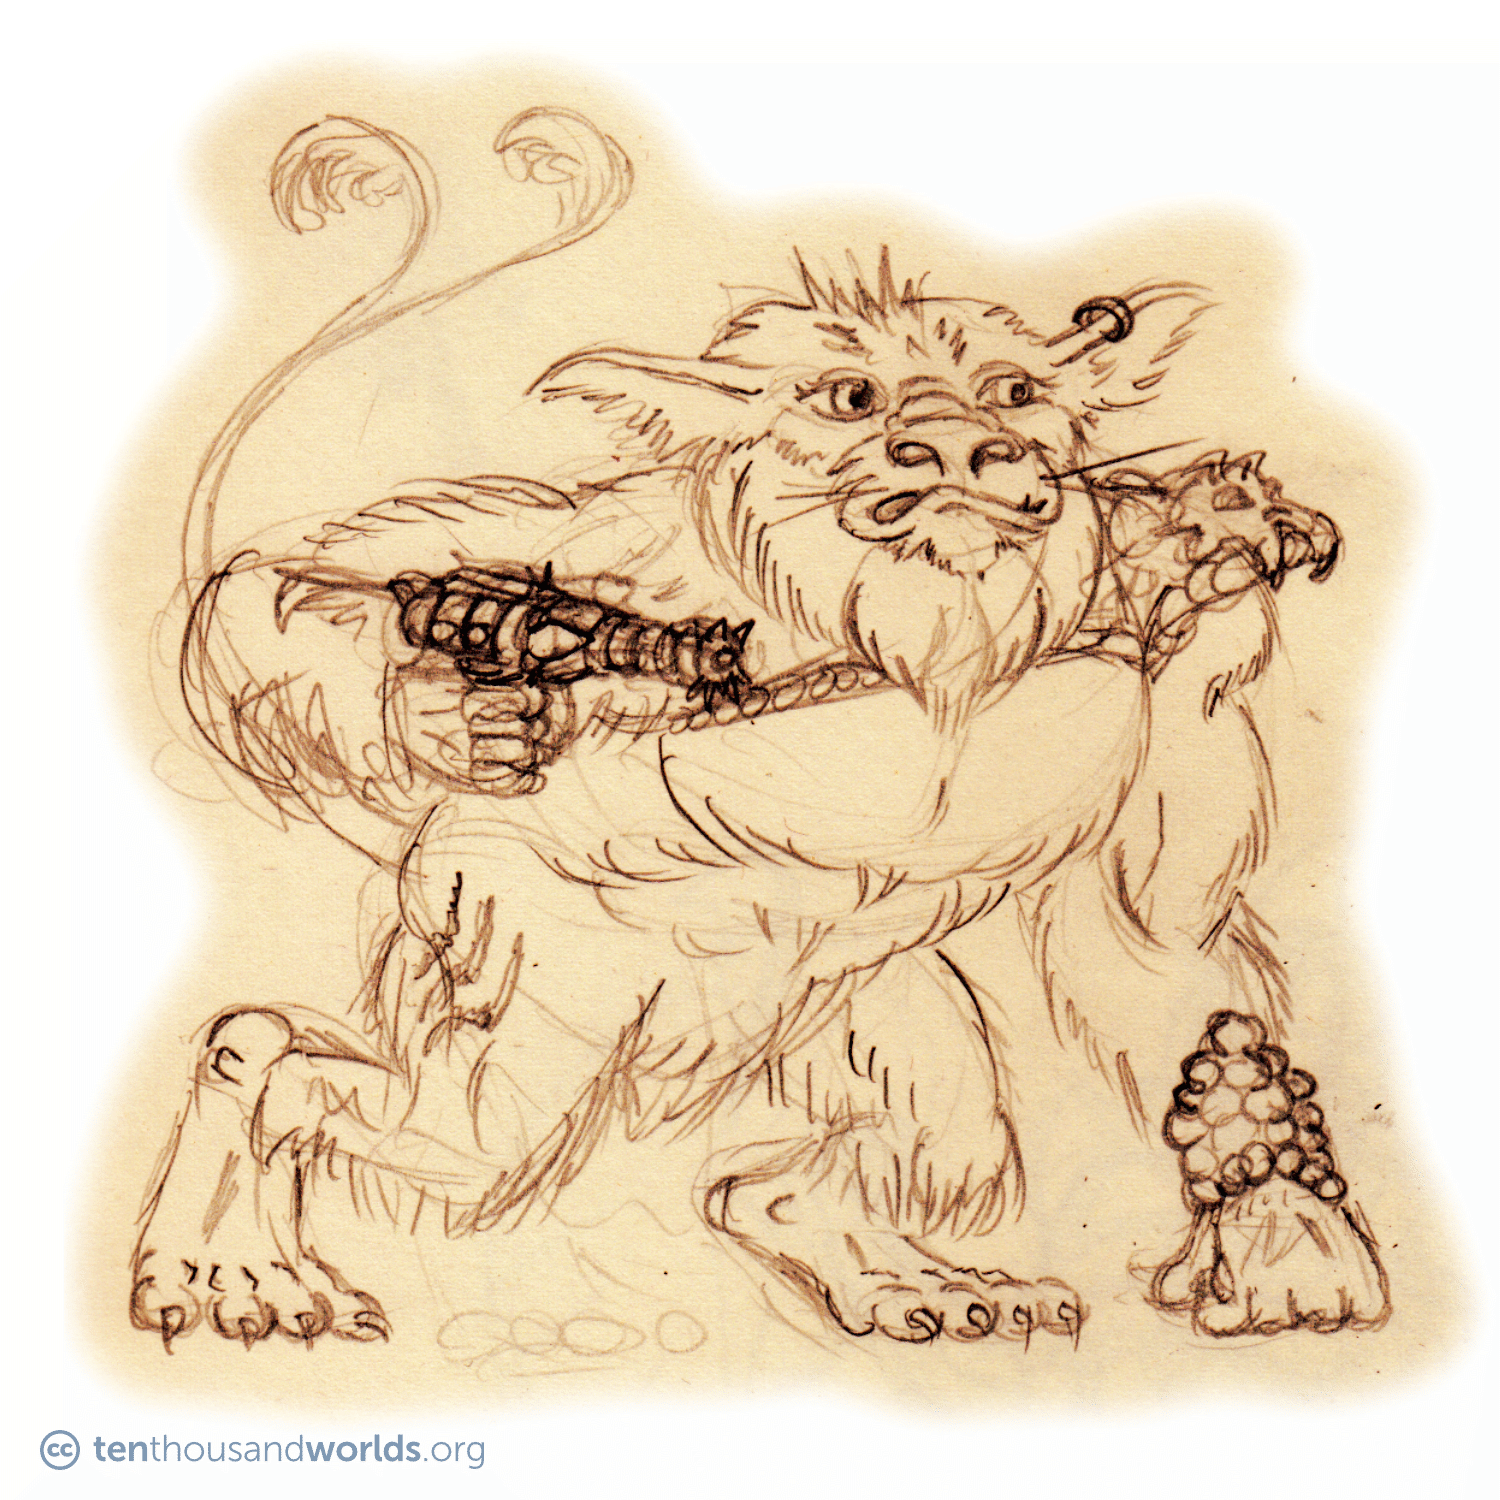 A pencil sketch of a fuzzy, ape-like creature in a knuckle-walking stance, with a leonine face, large pointed ears, and a long whip-like tail that splits into two puffs of fur. The creature wears an ear ring, shoulder armor, left forearm cuff, and holds and exotic pistol.